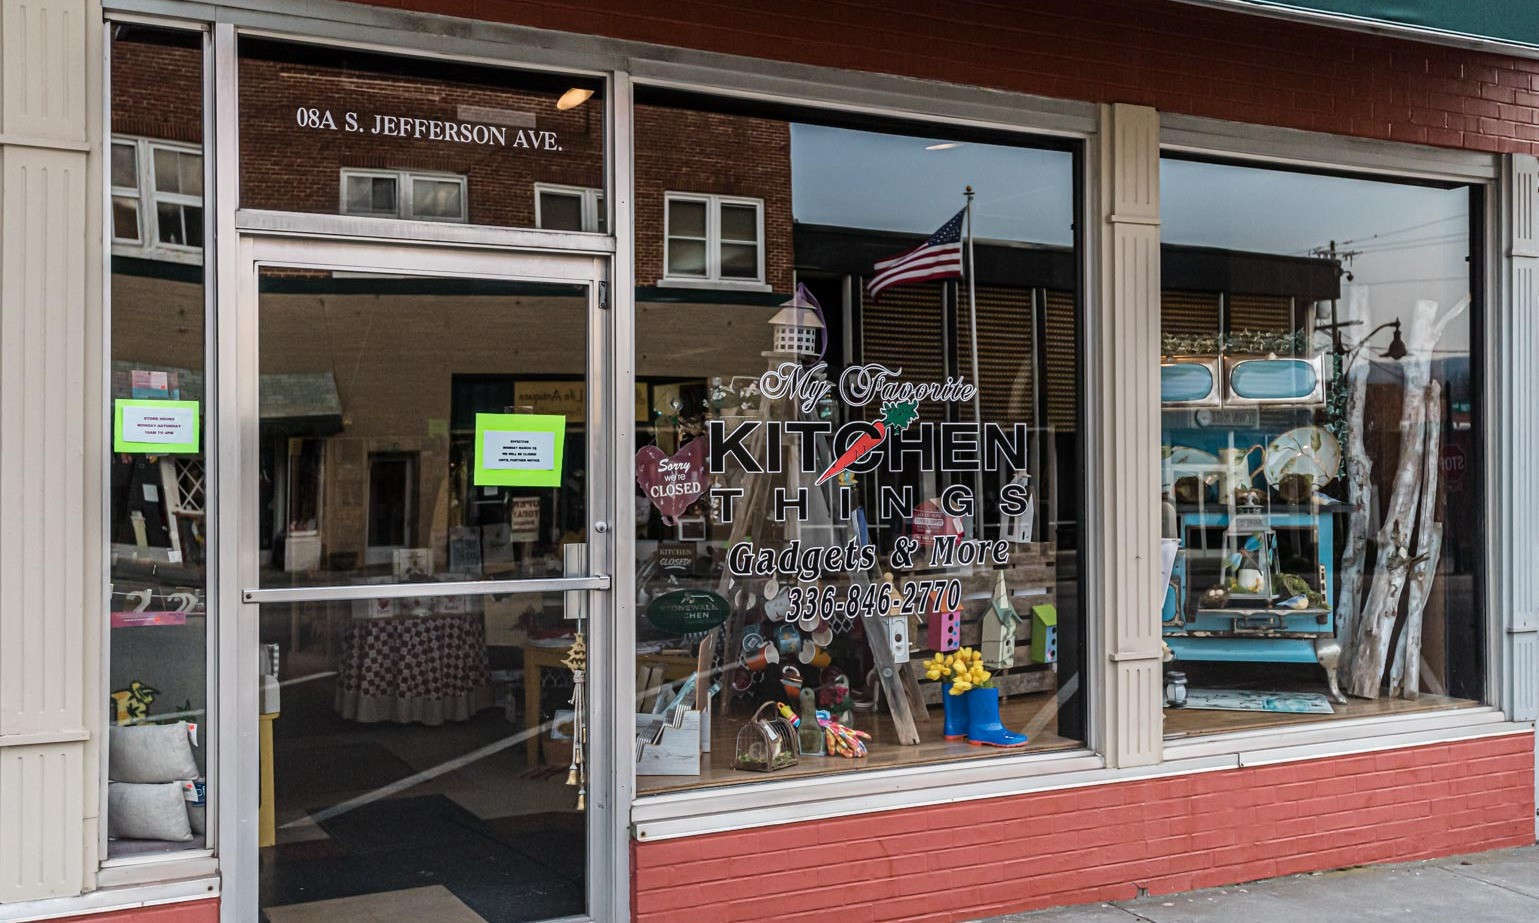 Are you looking for a new venture?  Take a look at this well established kitchen retail business for sale in  Historic Downtown West Jefferson.